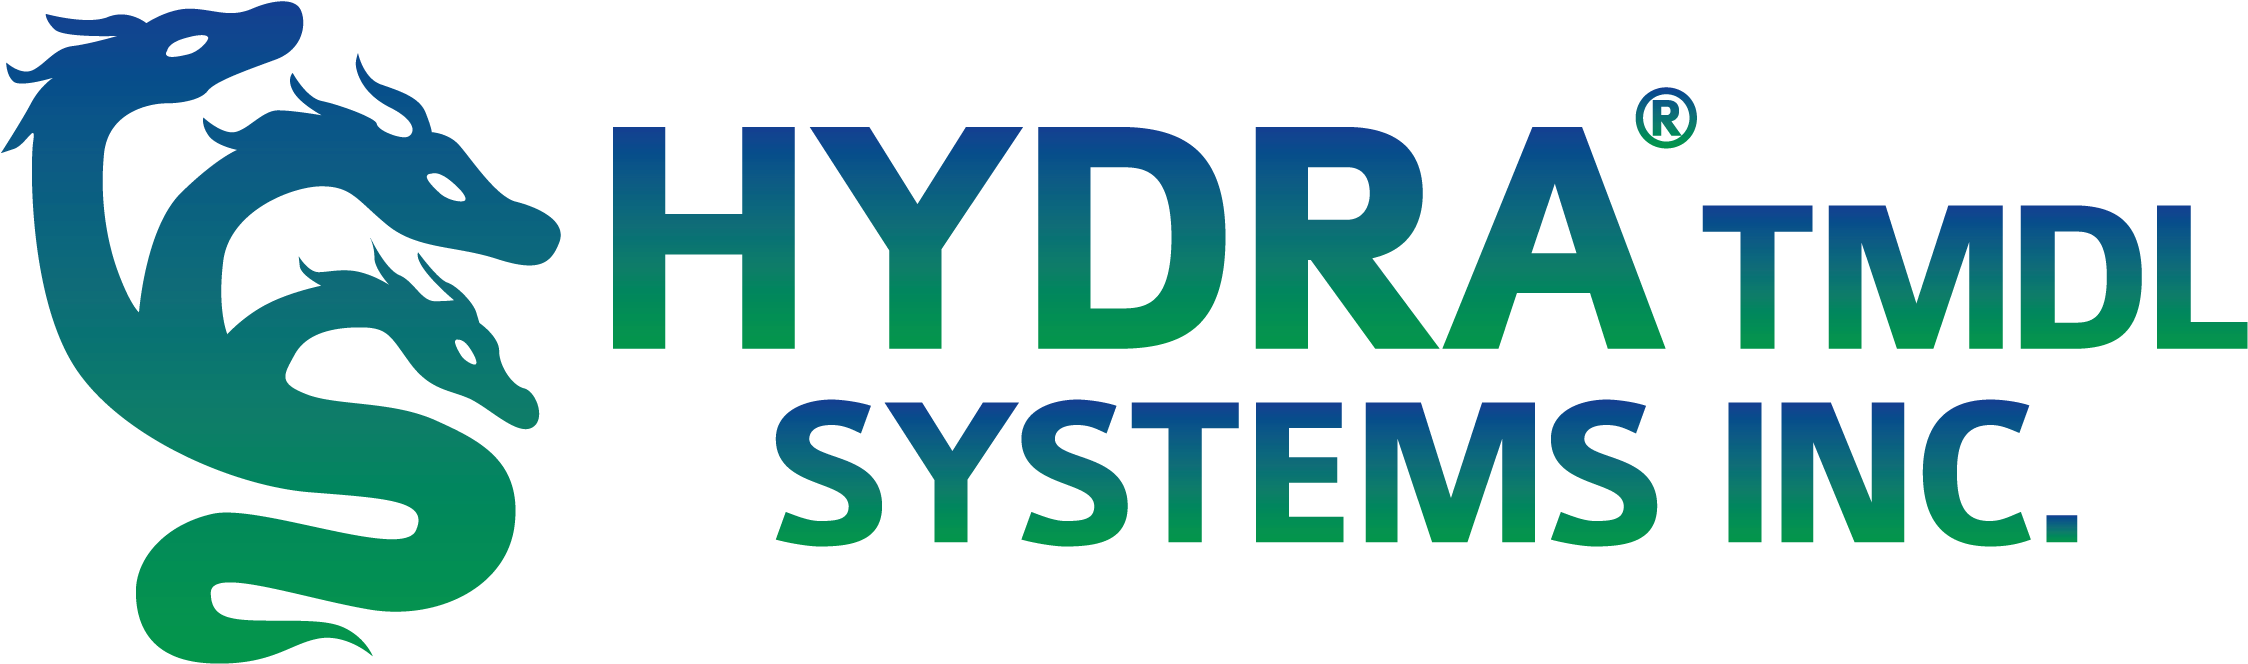 Hydra Systems Inc Logo PNG image